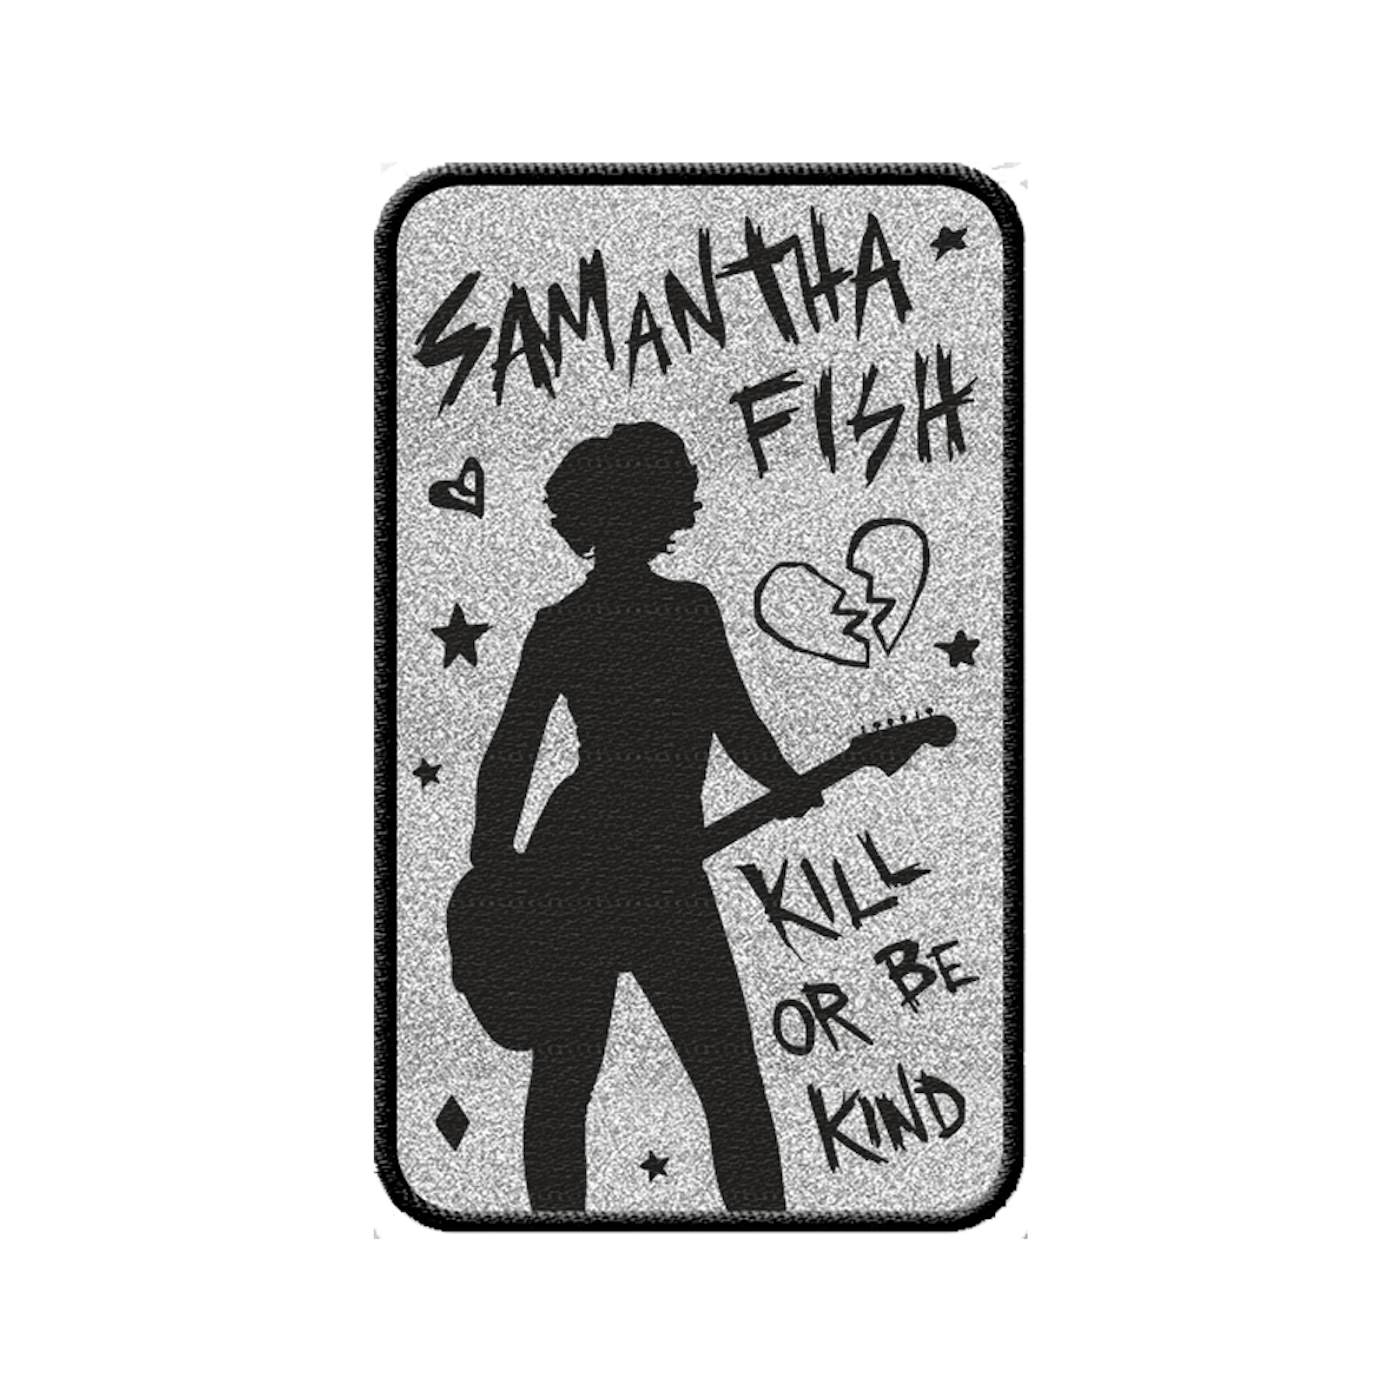 Samantha Fish Silver Thread Kill or be Kind Outline Patch